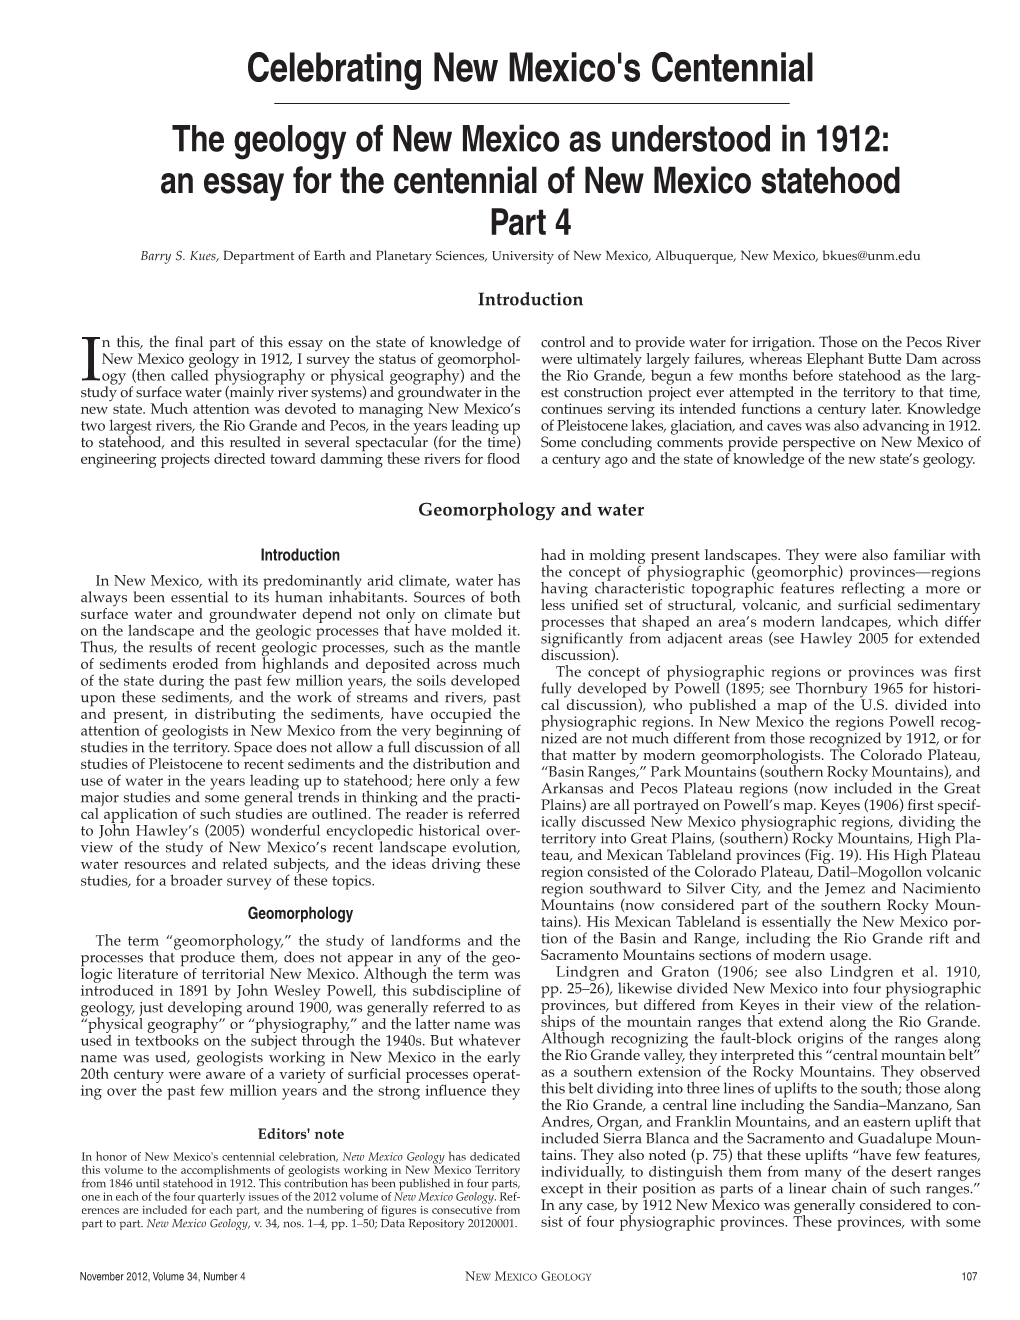 An Essay for the Centennial of New Mexico Statehood Part 4 Barry S